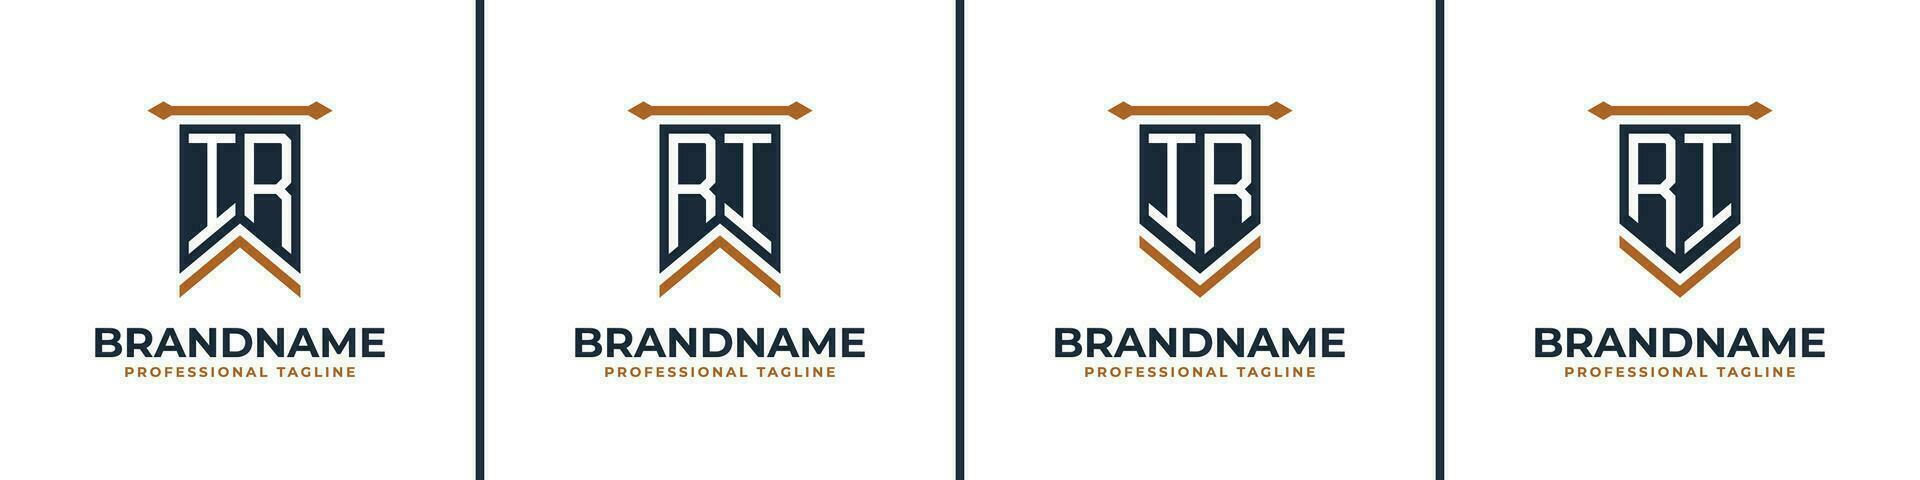 Letter IR and RI Pennant Flag Logo Set, Represent Victory. Suitable for any business with IR or RI initials. vector